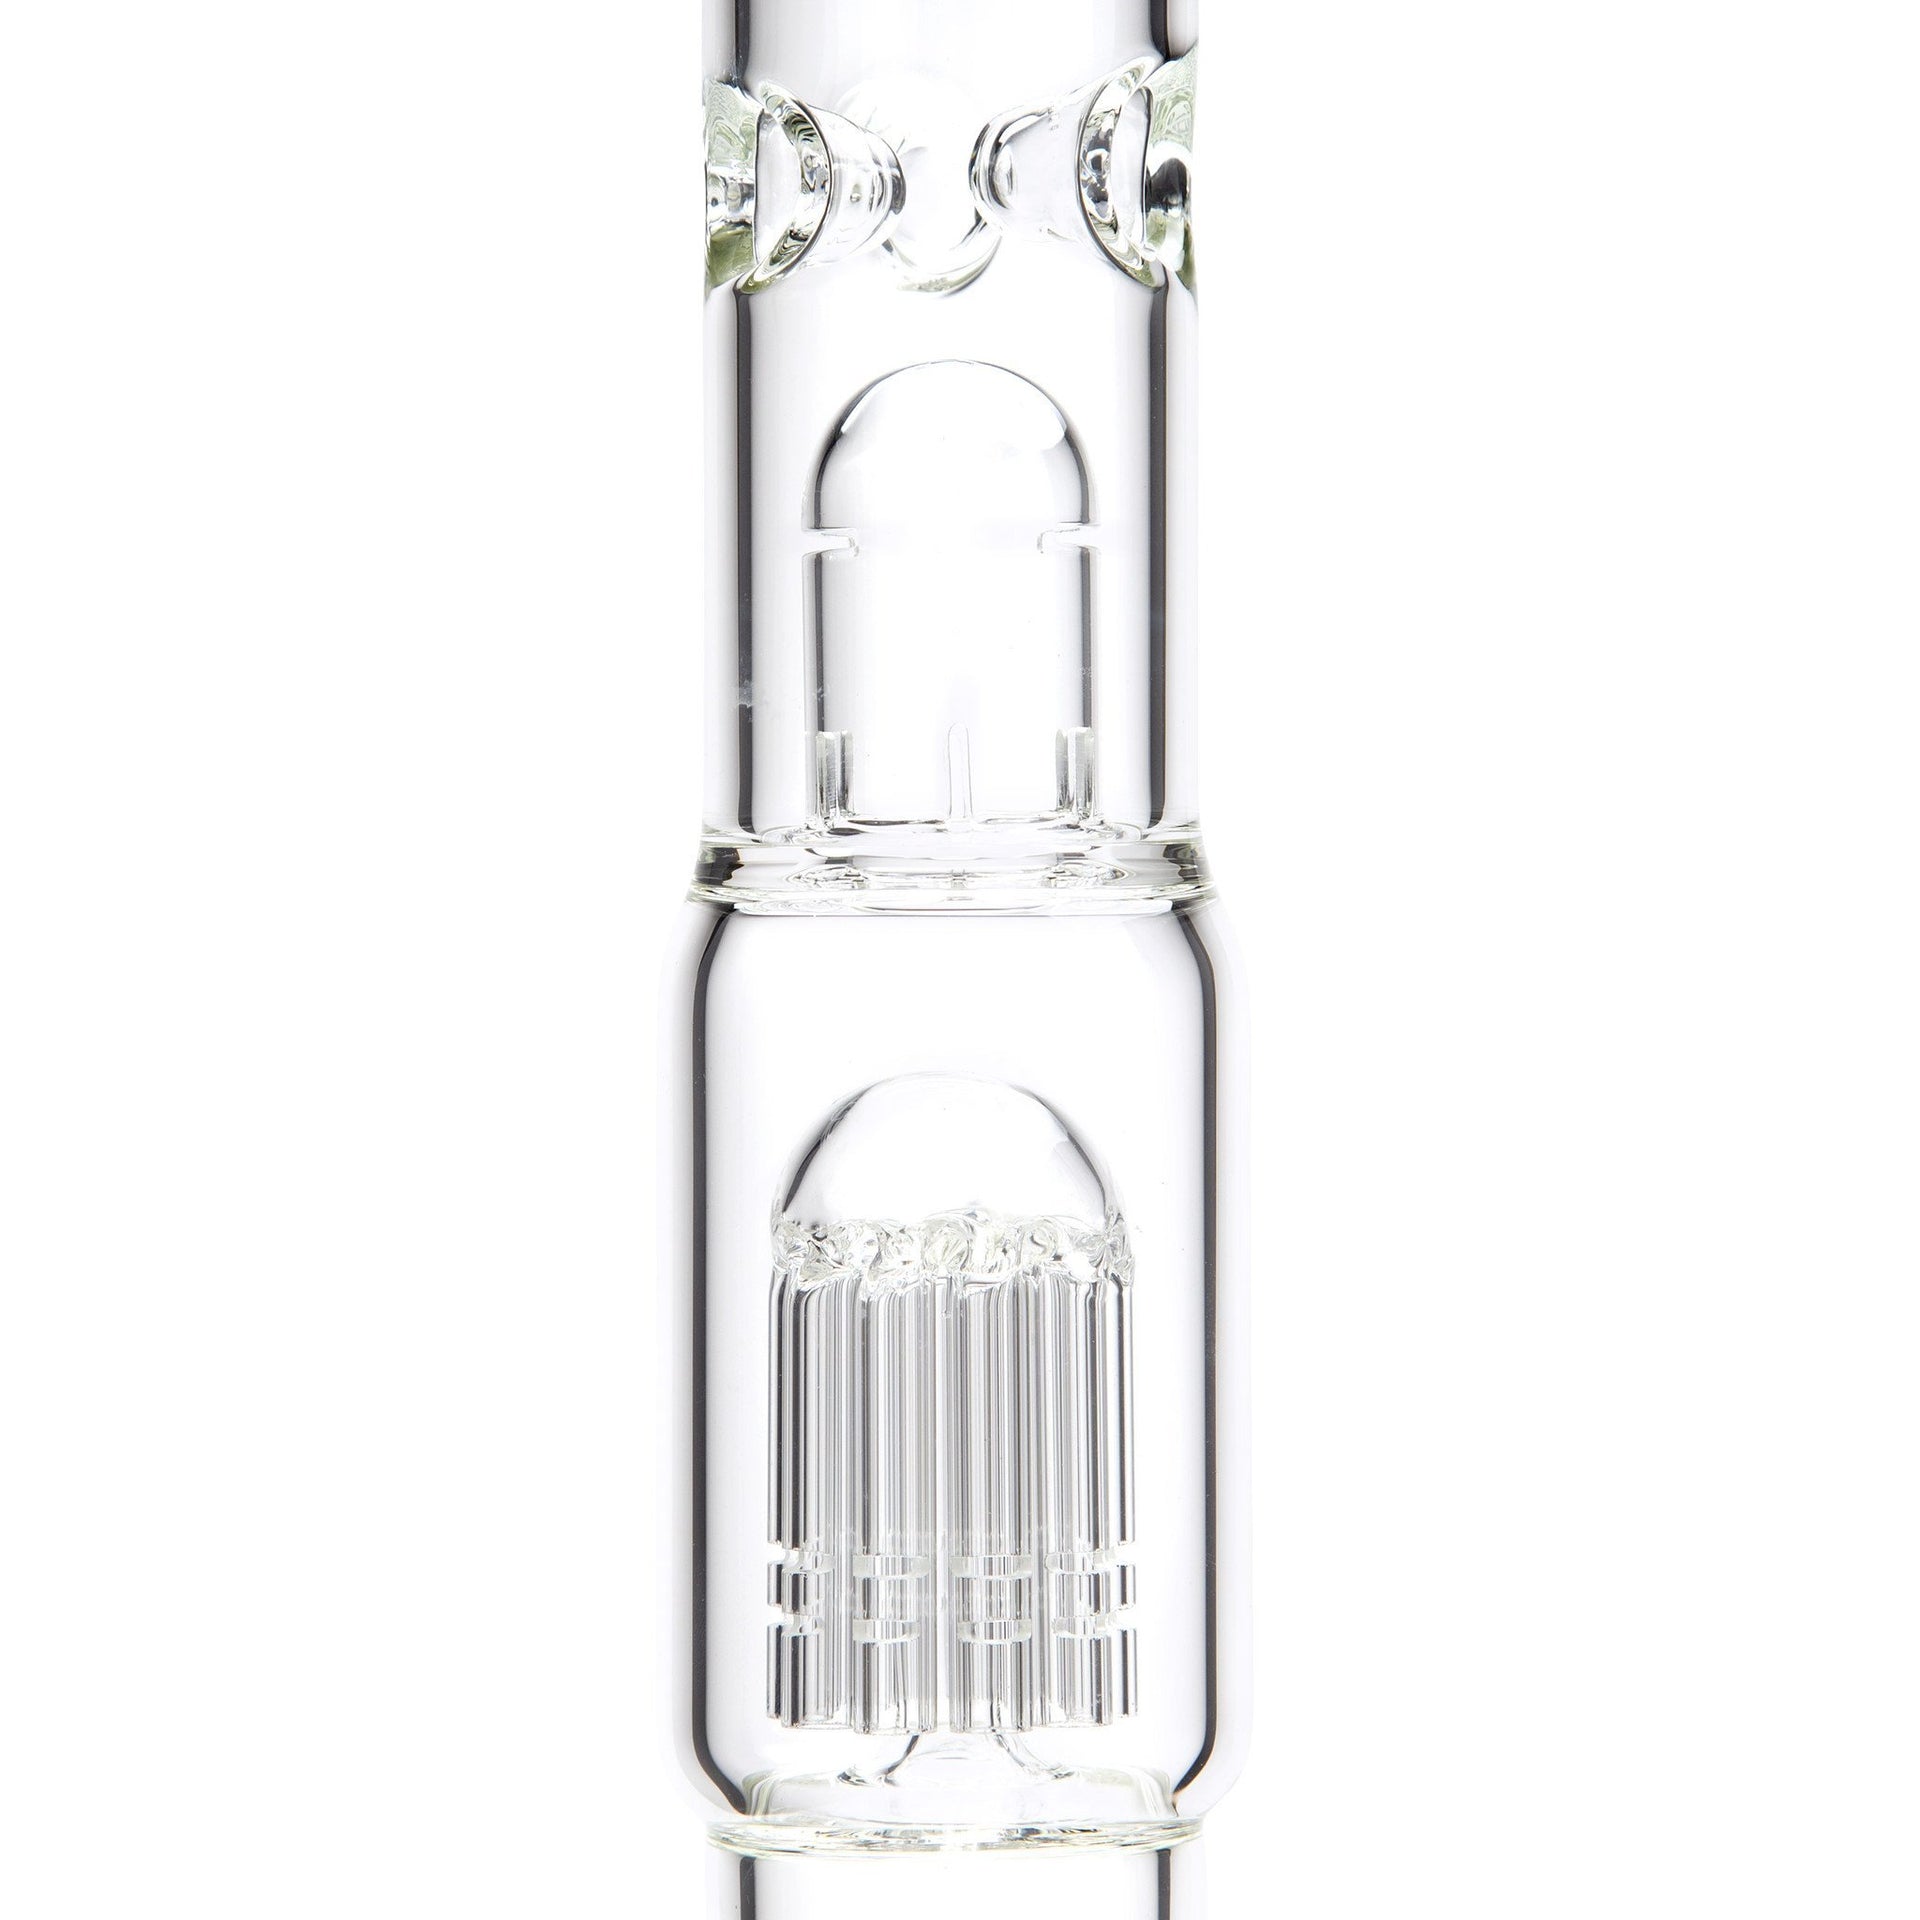 ROOR Inline w/10 Arm Tree - 420 Science - The most trusted online smoke shop.